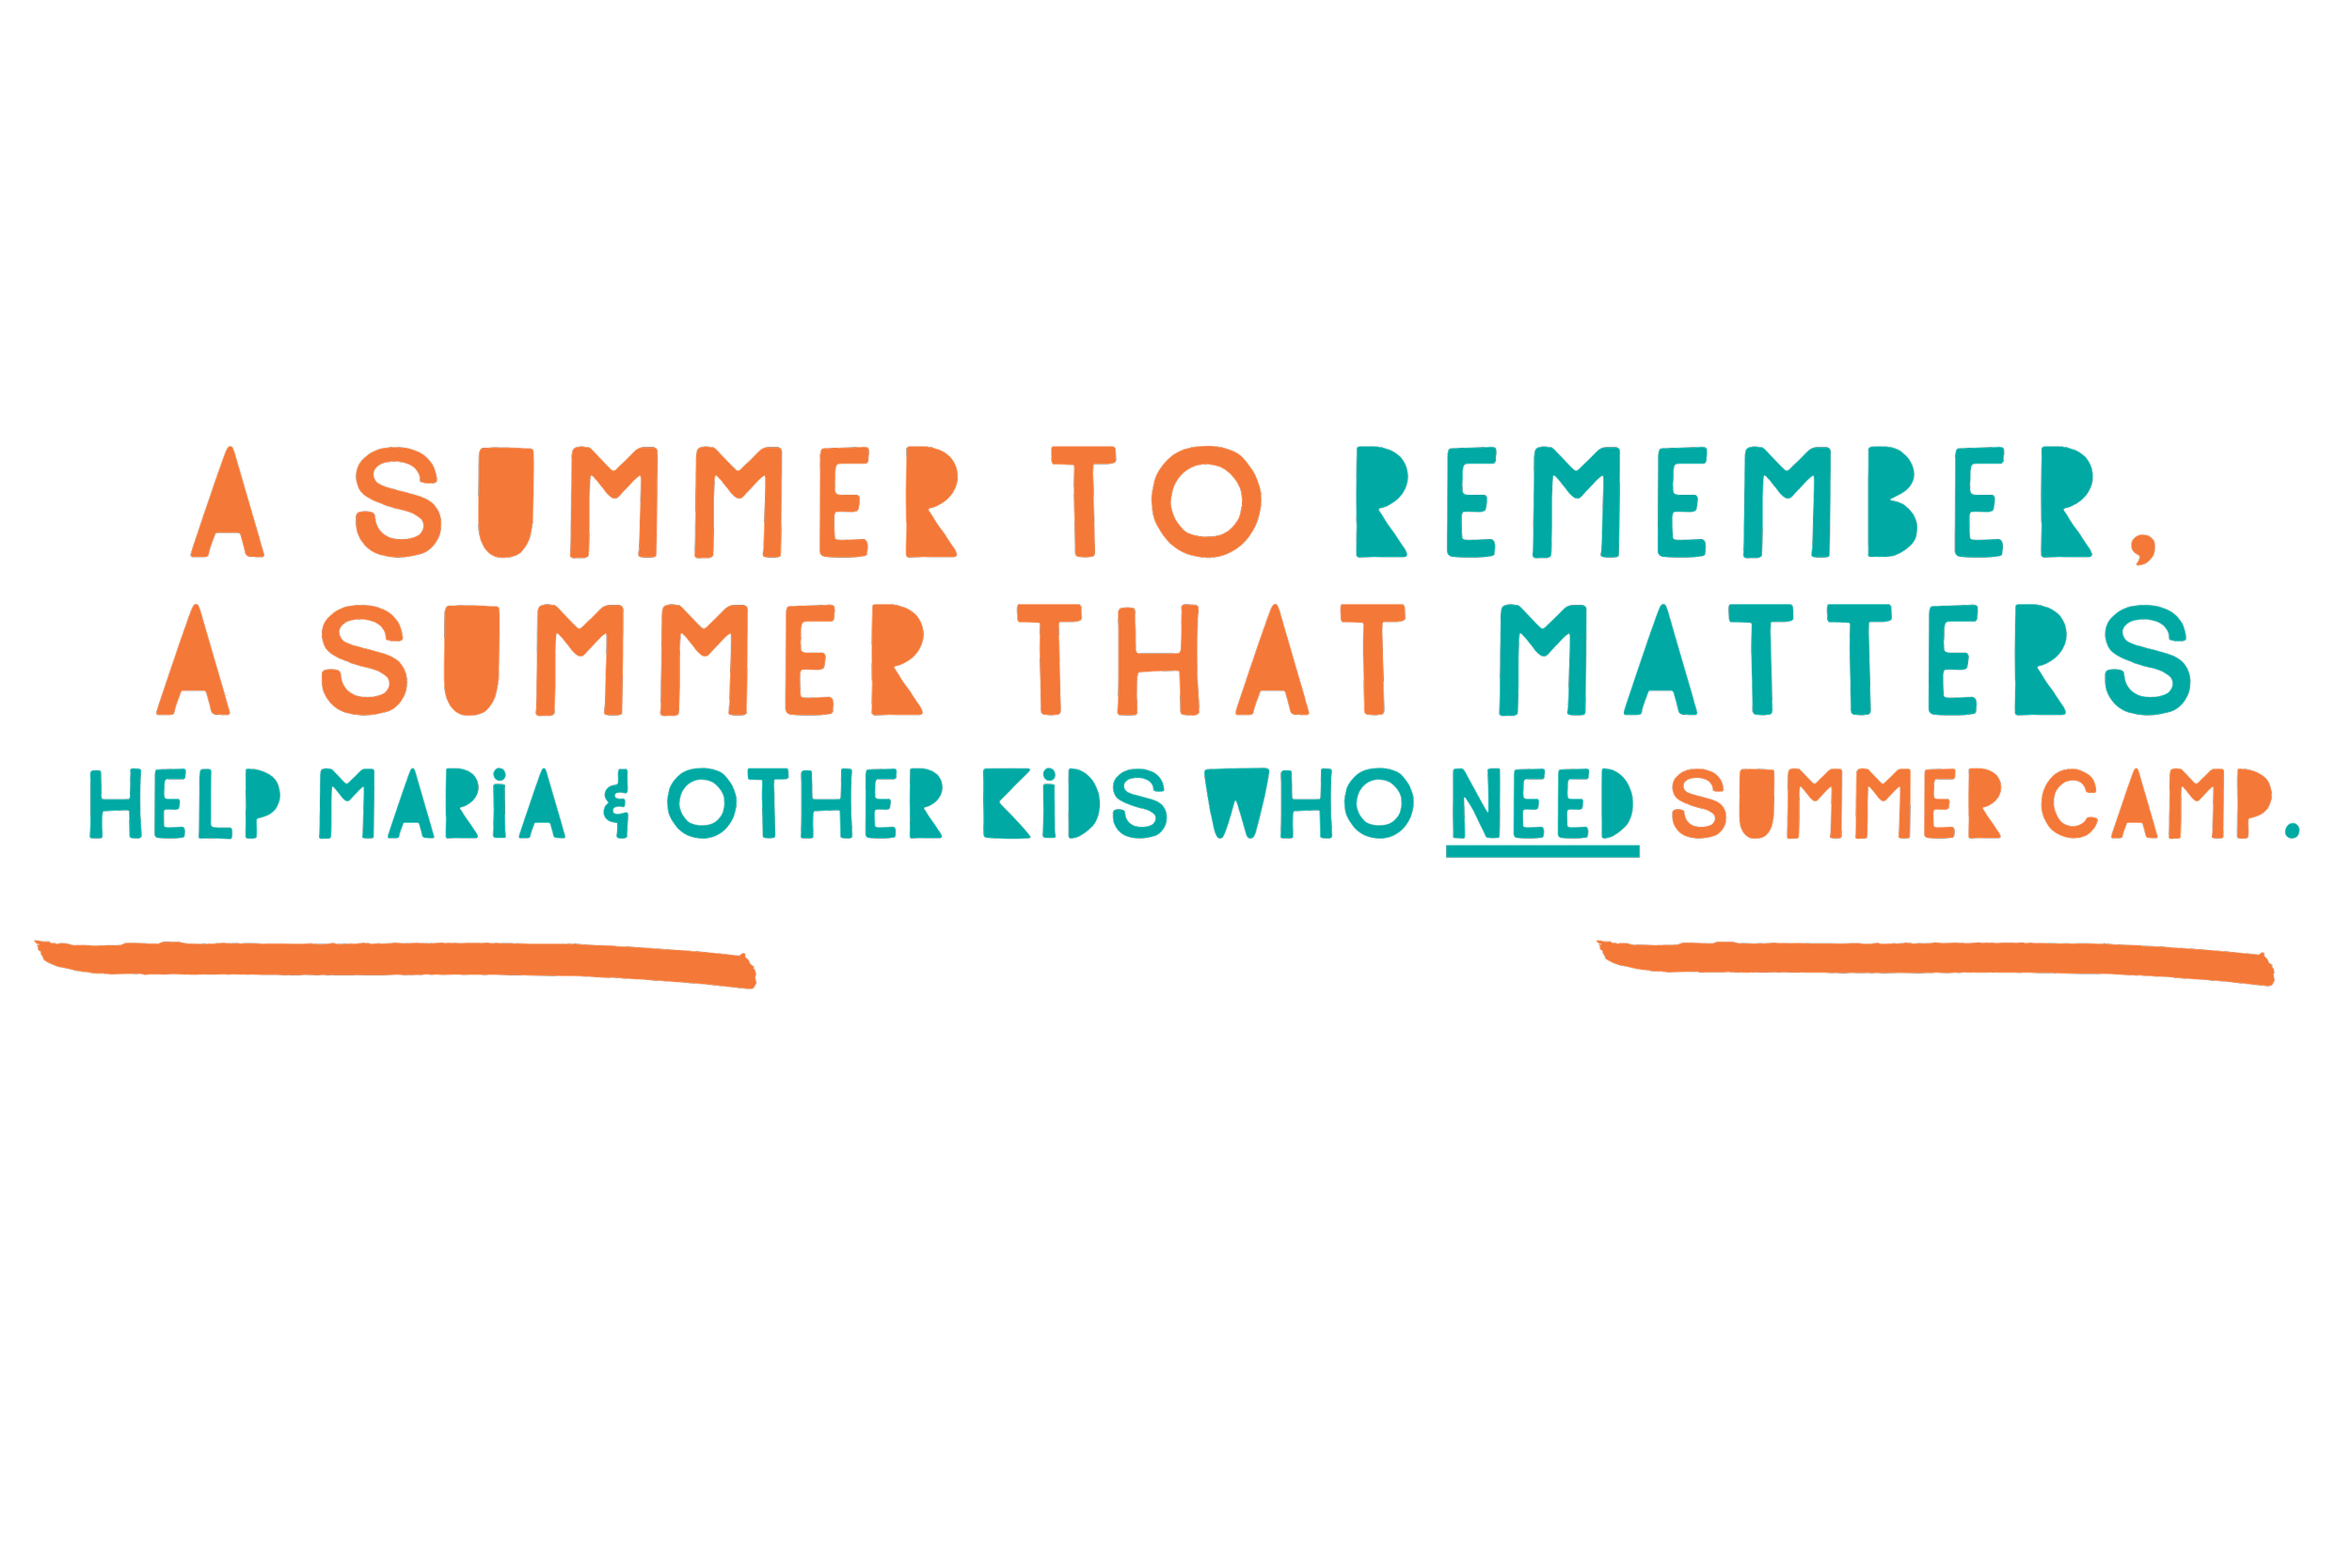 A Summer to Remember, A Summer that Matters